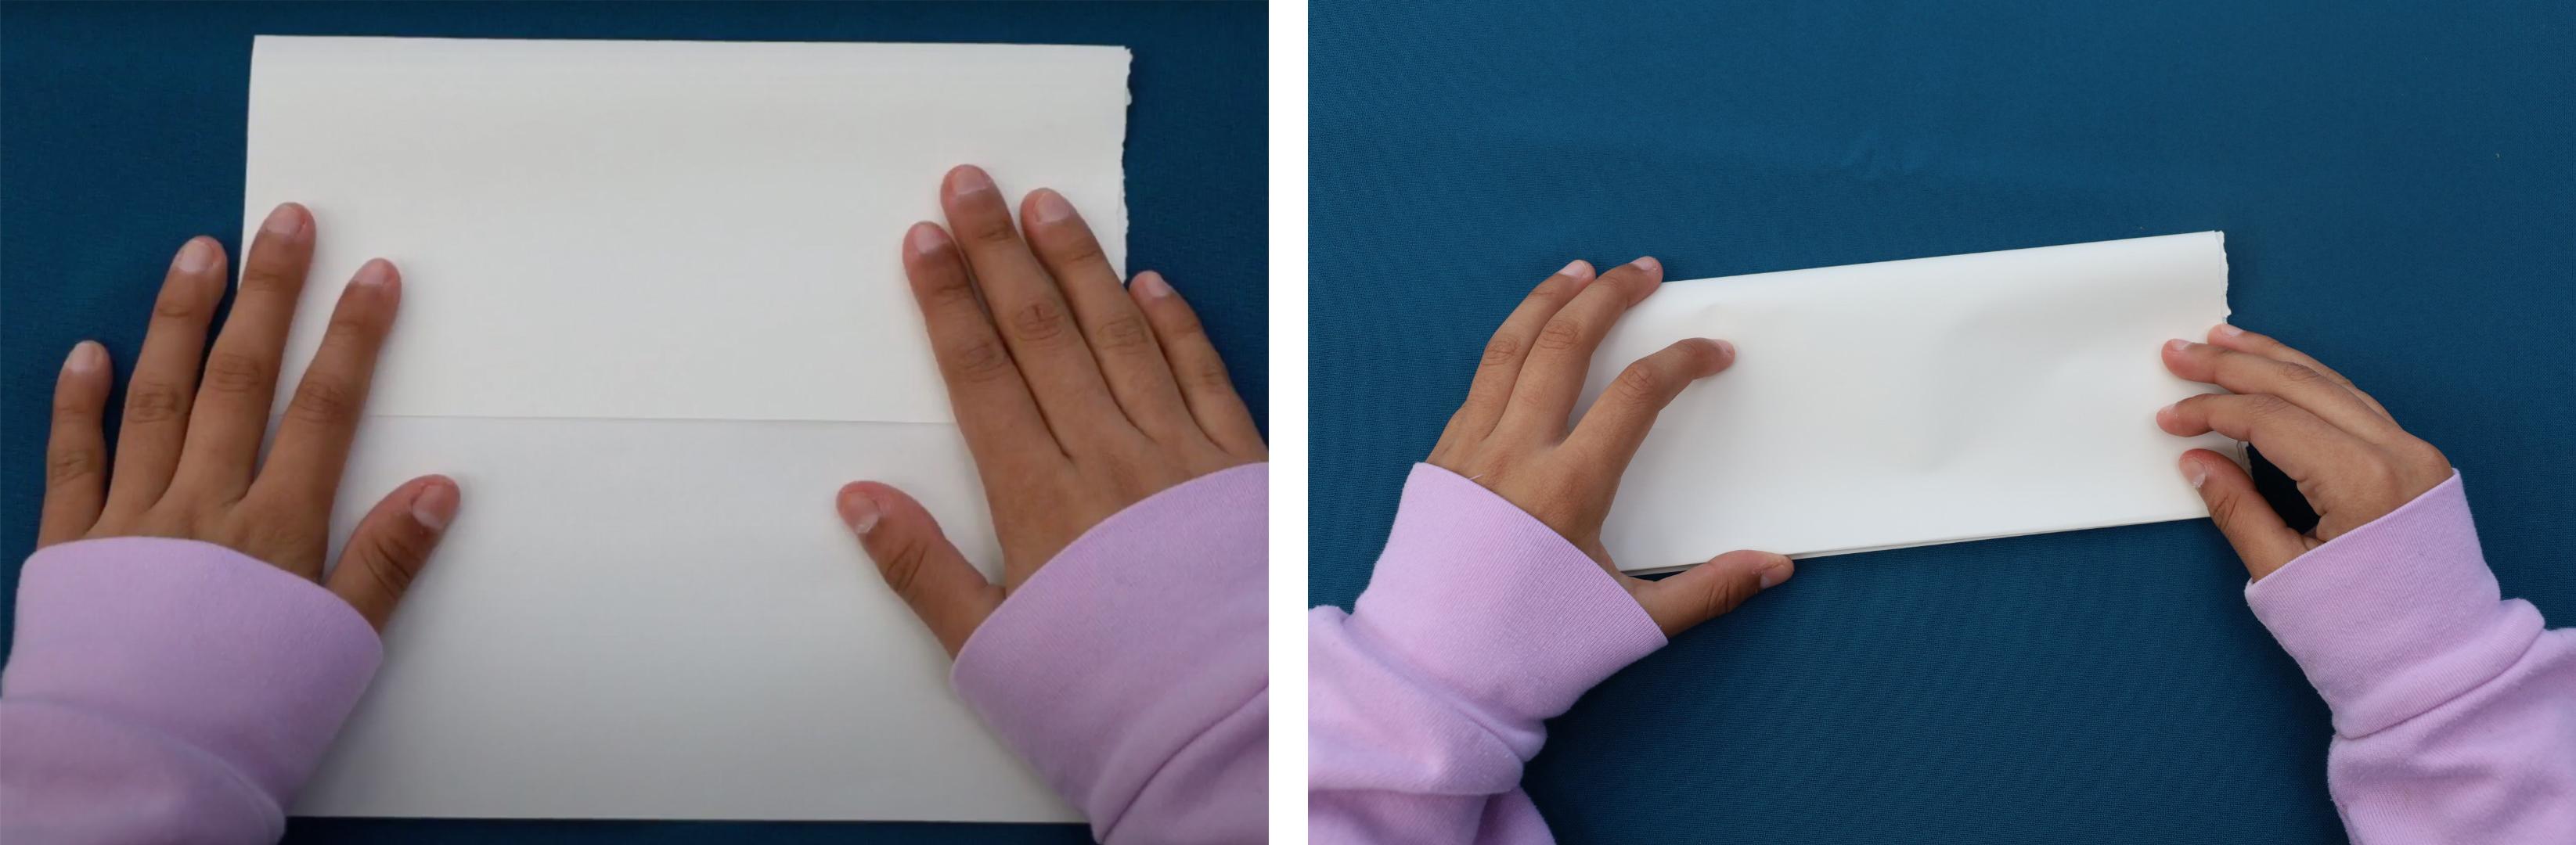 images showing how to fold paper like a letter